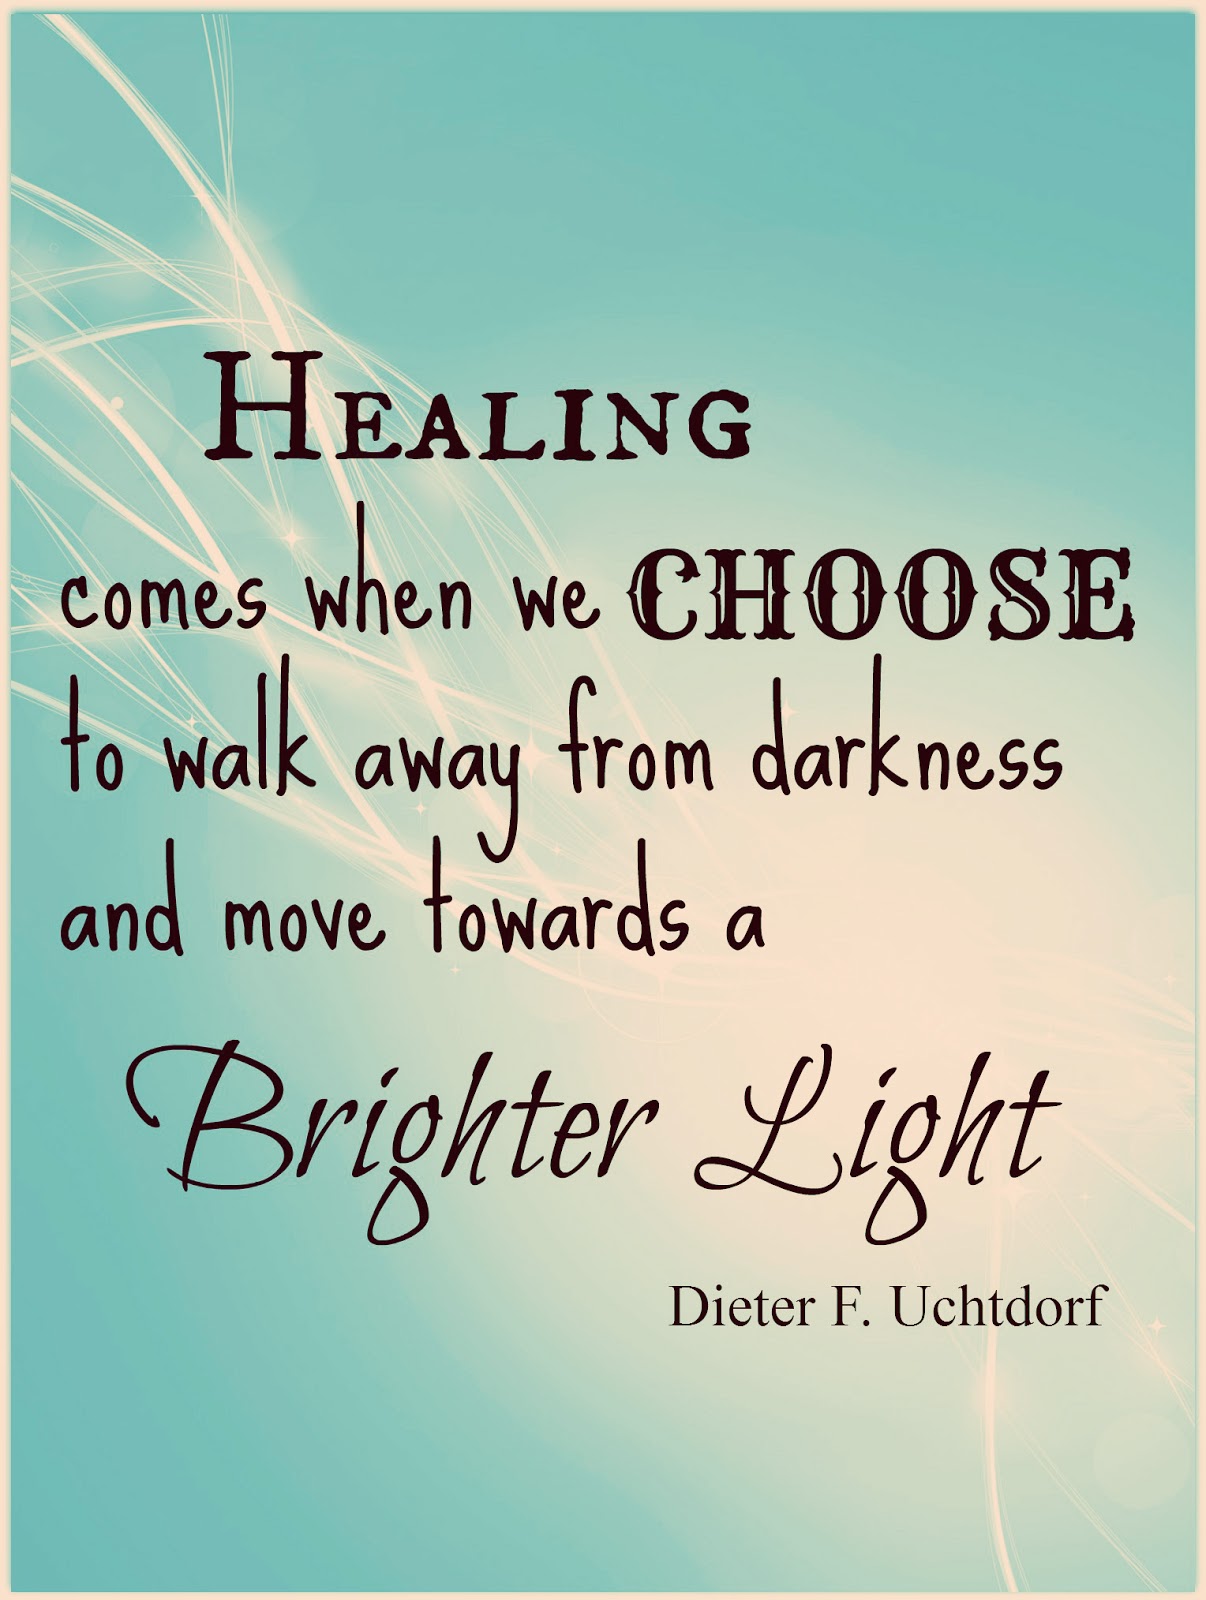 Healing comes when we choose to walk away from darkness and move towards a brighter light. Dieter F. Uchtdorf